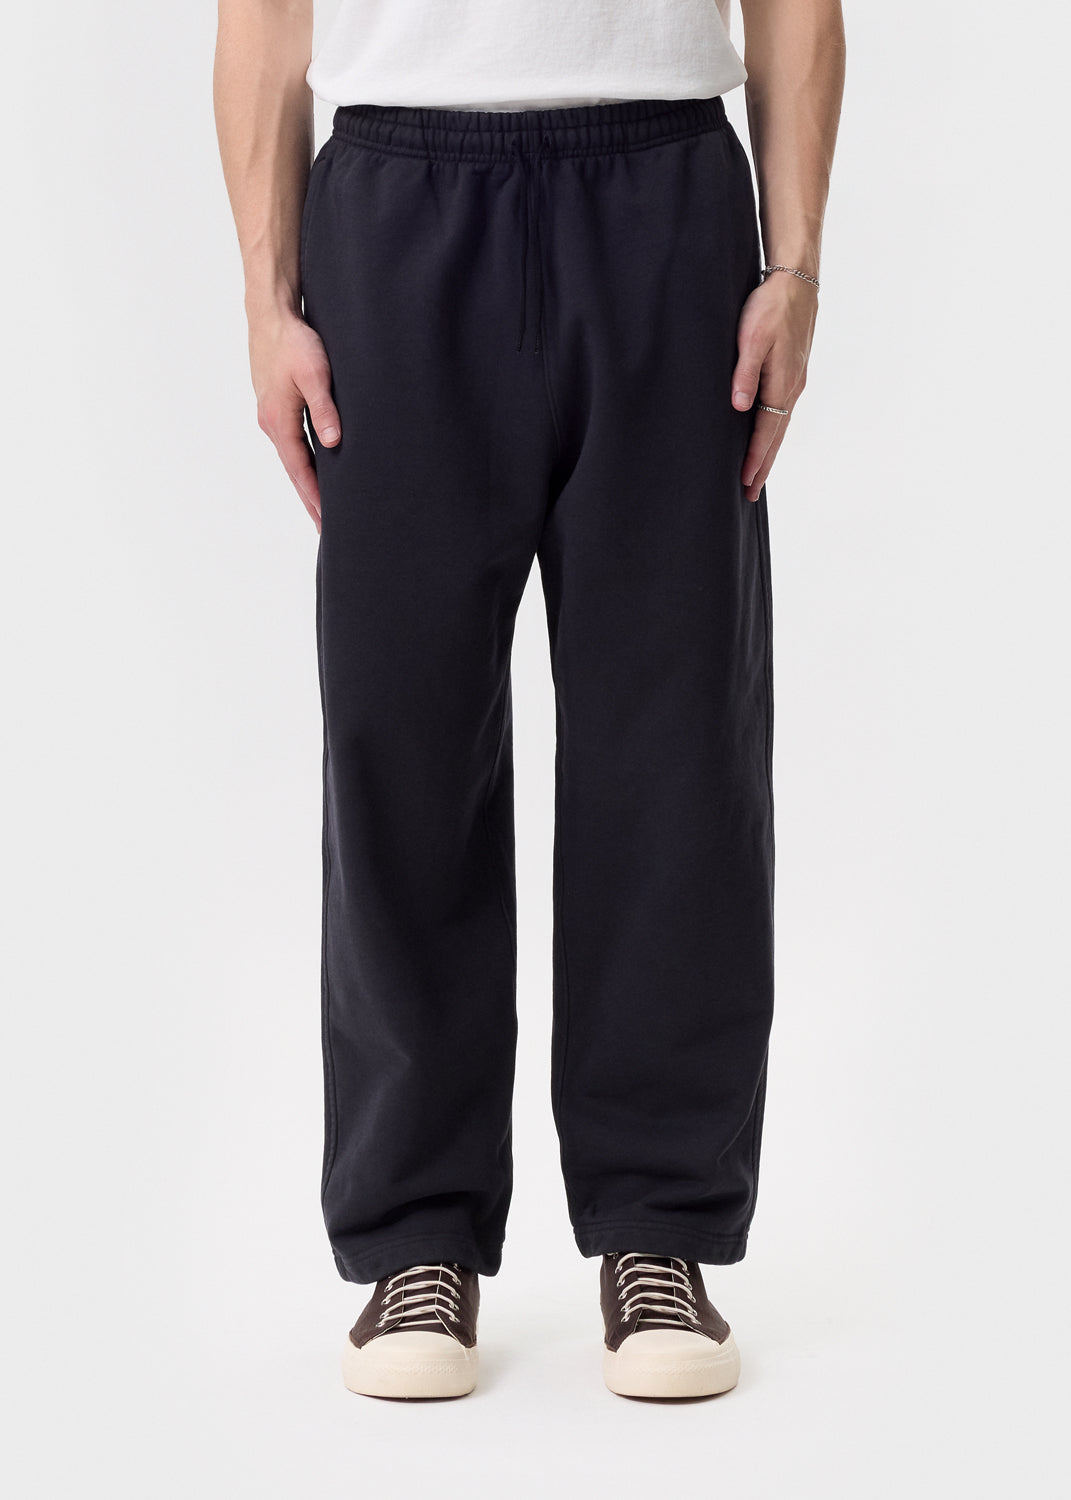 Lady White Co. - Black Super Weighted Sweatpants | 1032 SPACE